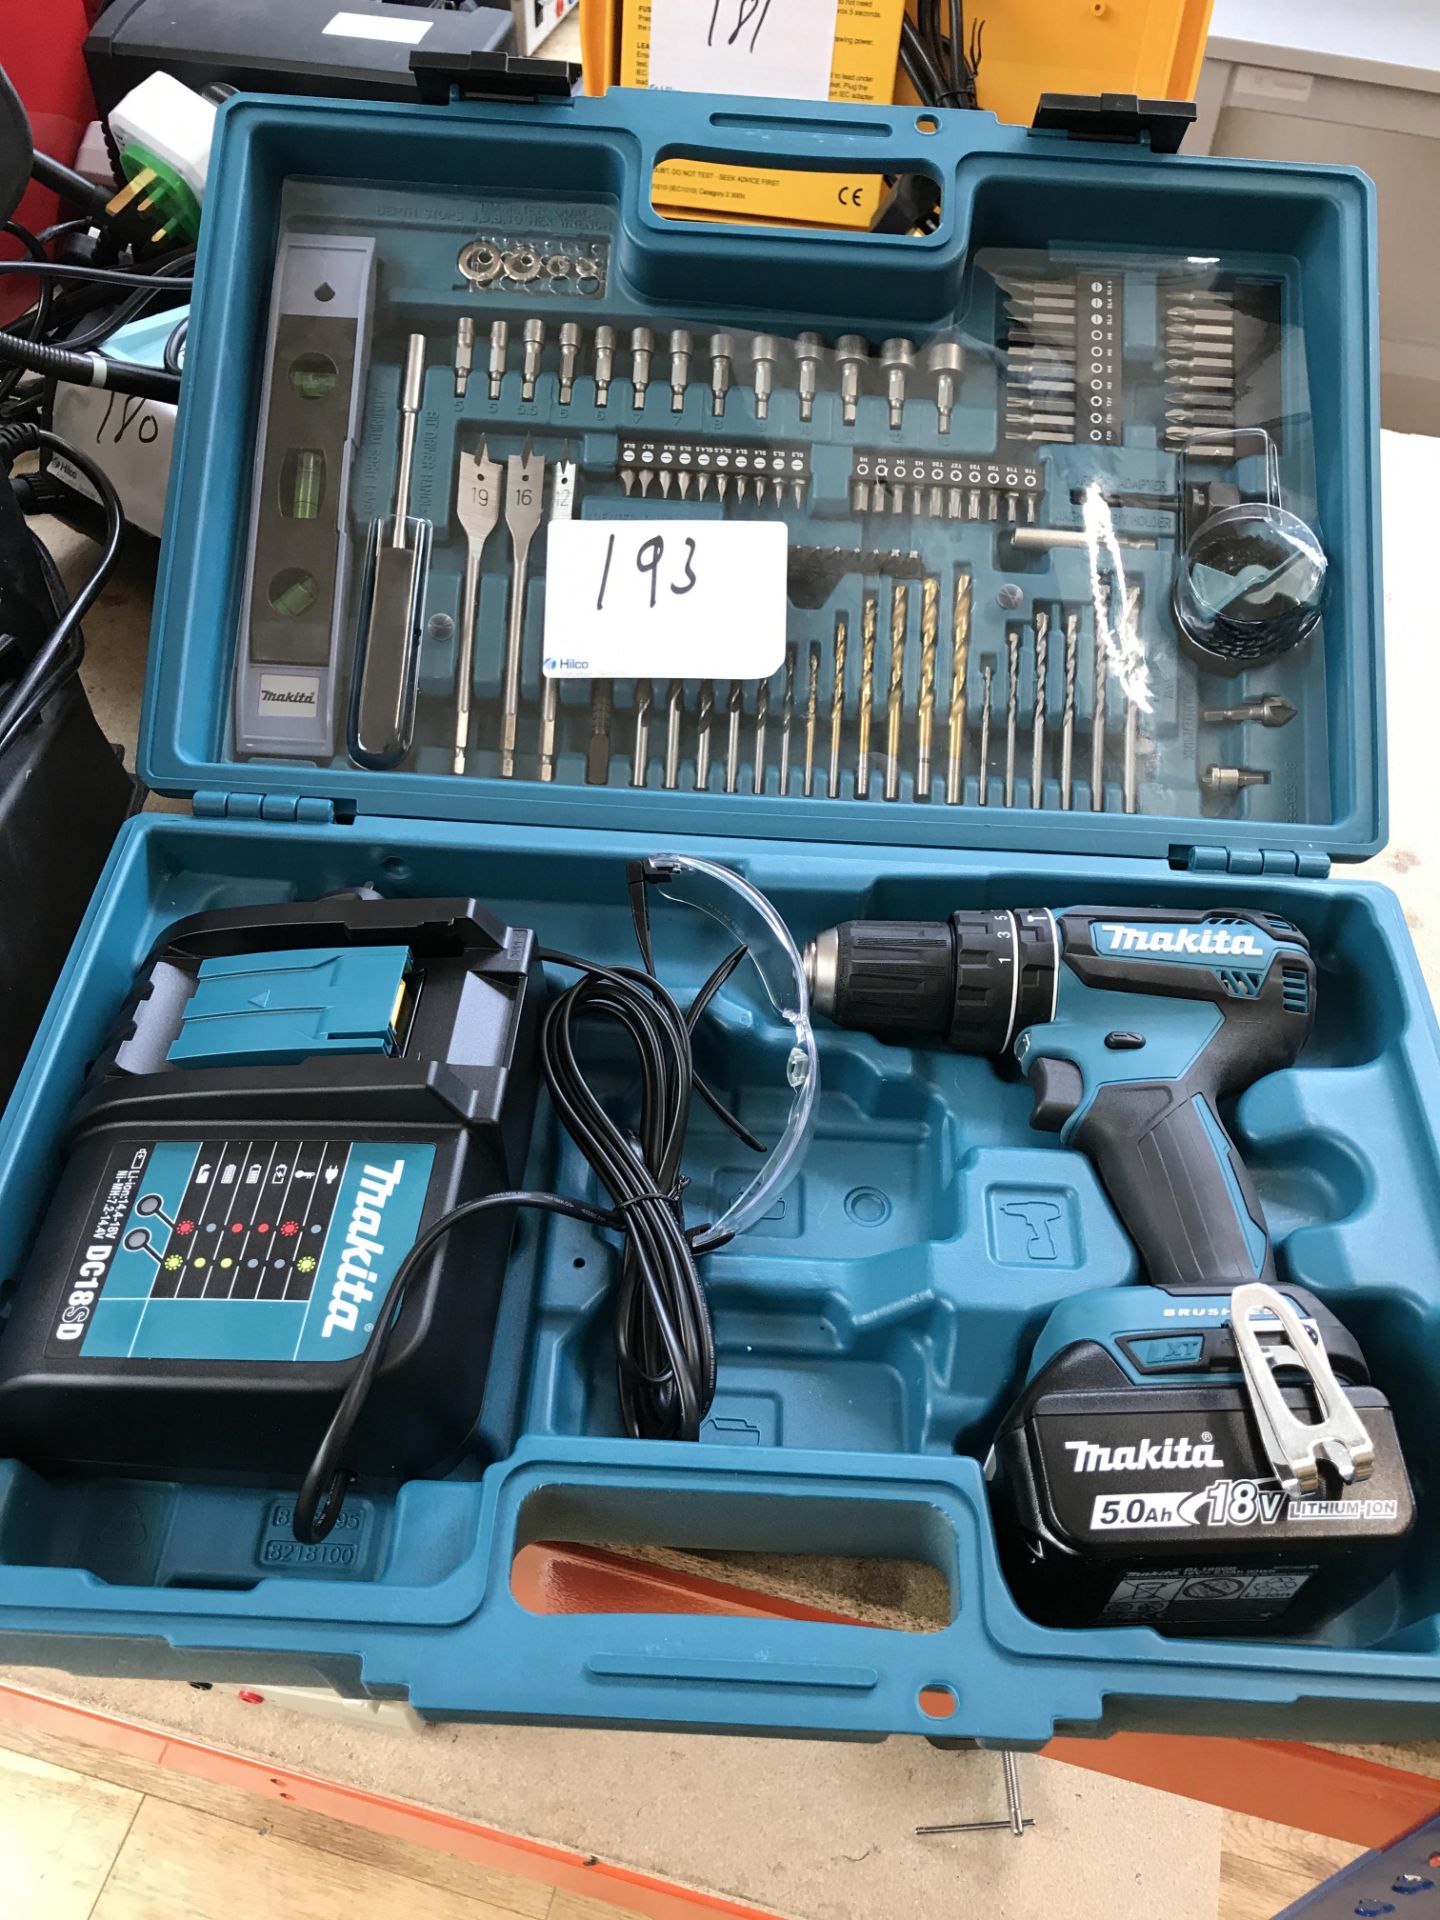 1, Makita DHP485 Cordless Combi Drill Set with 18v Battery, Charger and Accessories in carry case, A